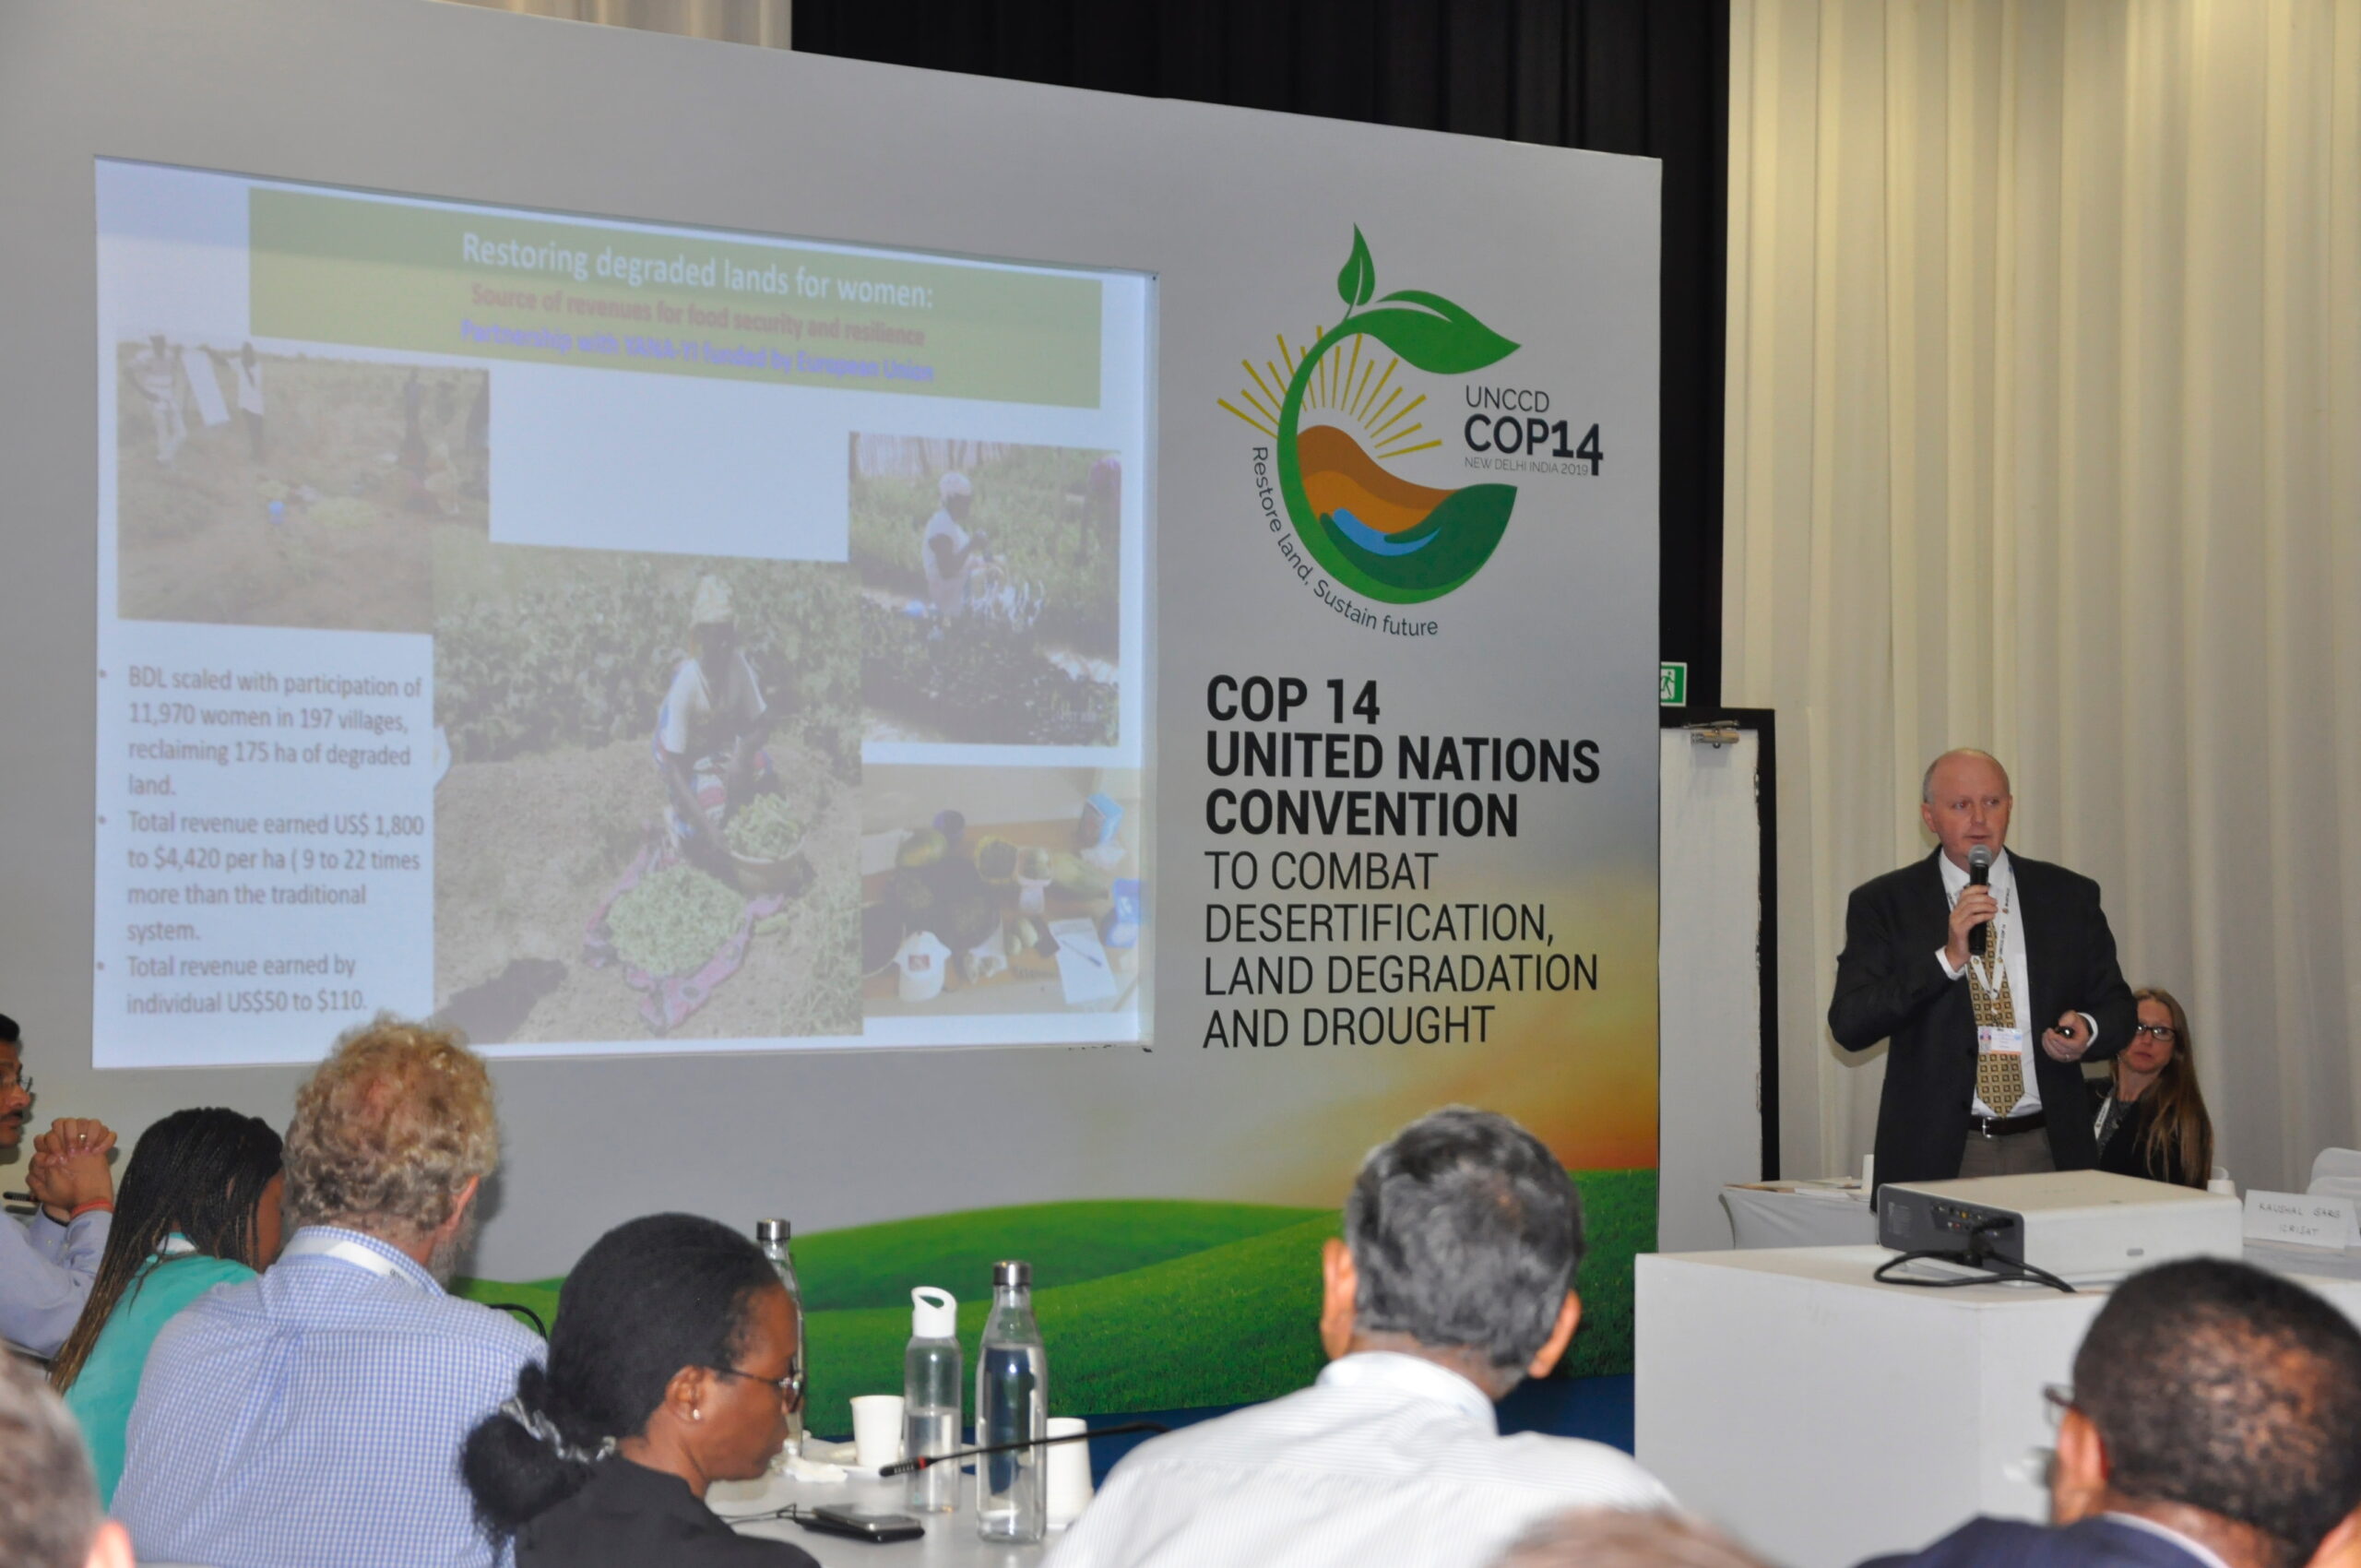 Dr Anthony Whitbread speaks about the gender significance of land restoration in Niger.